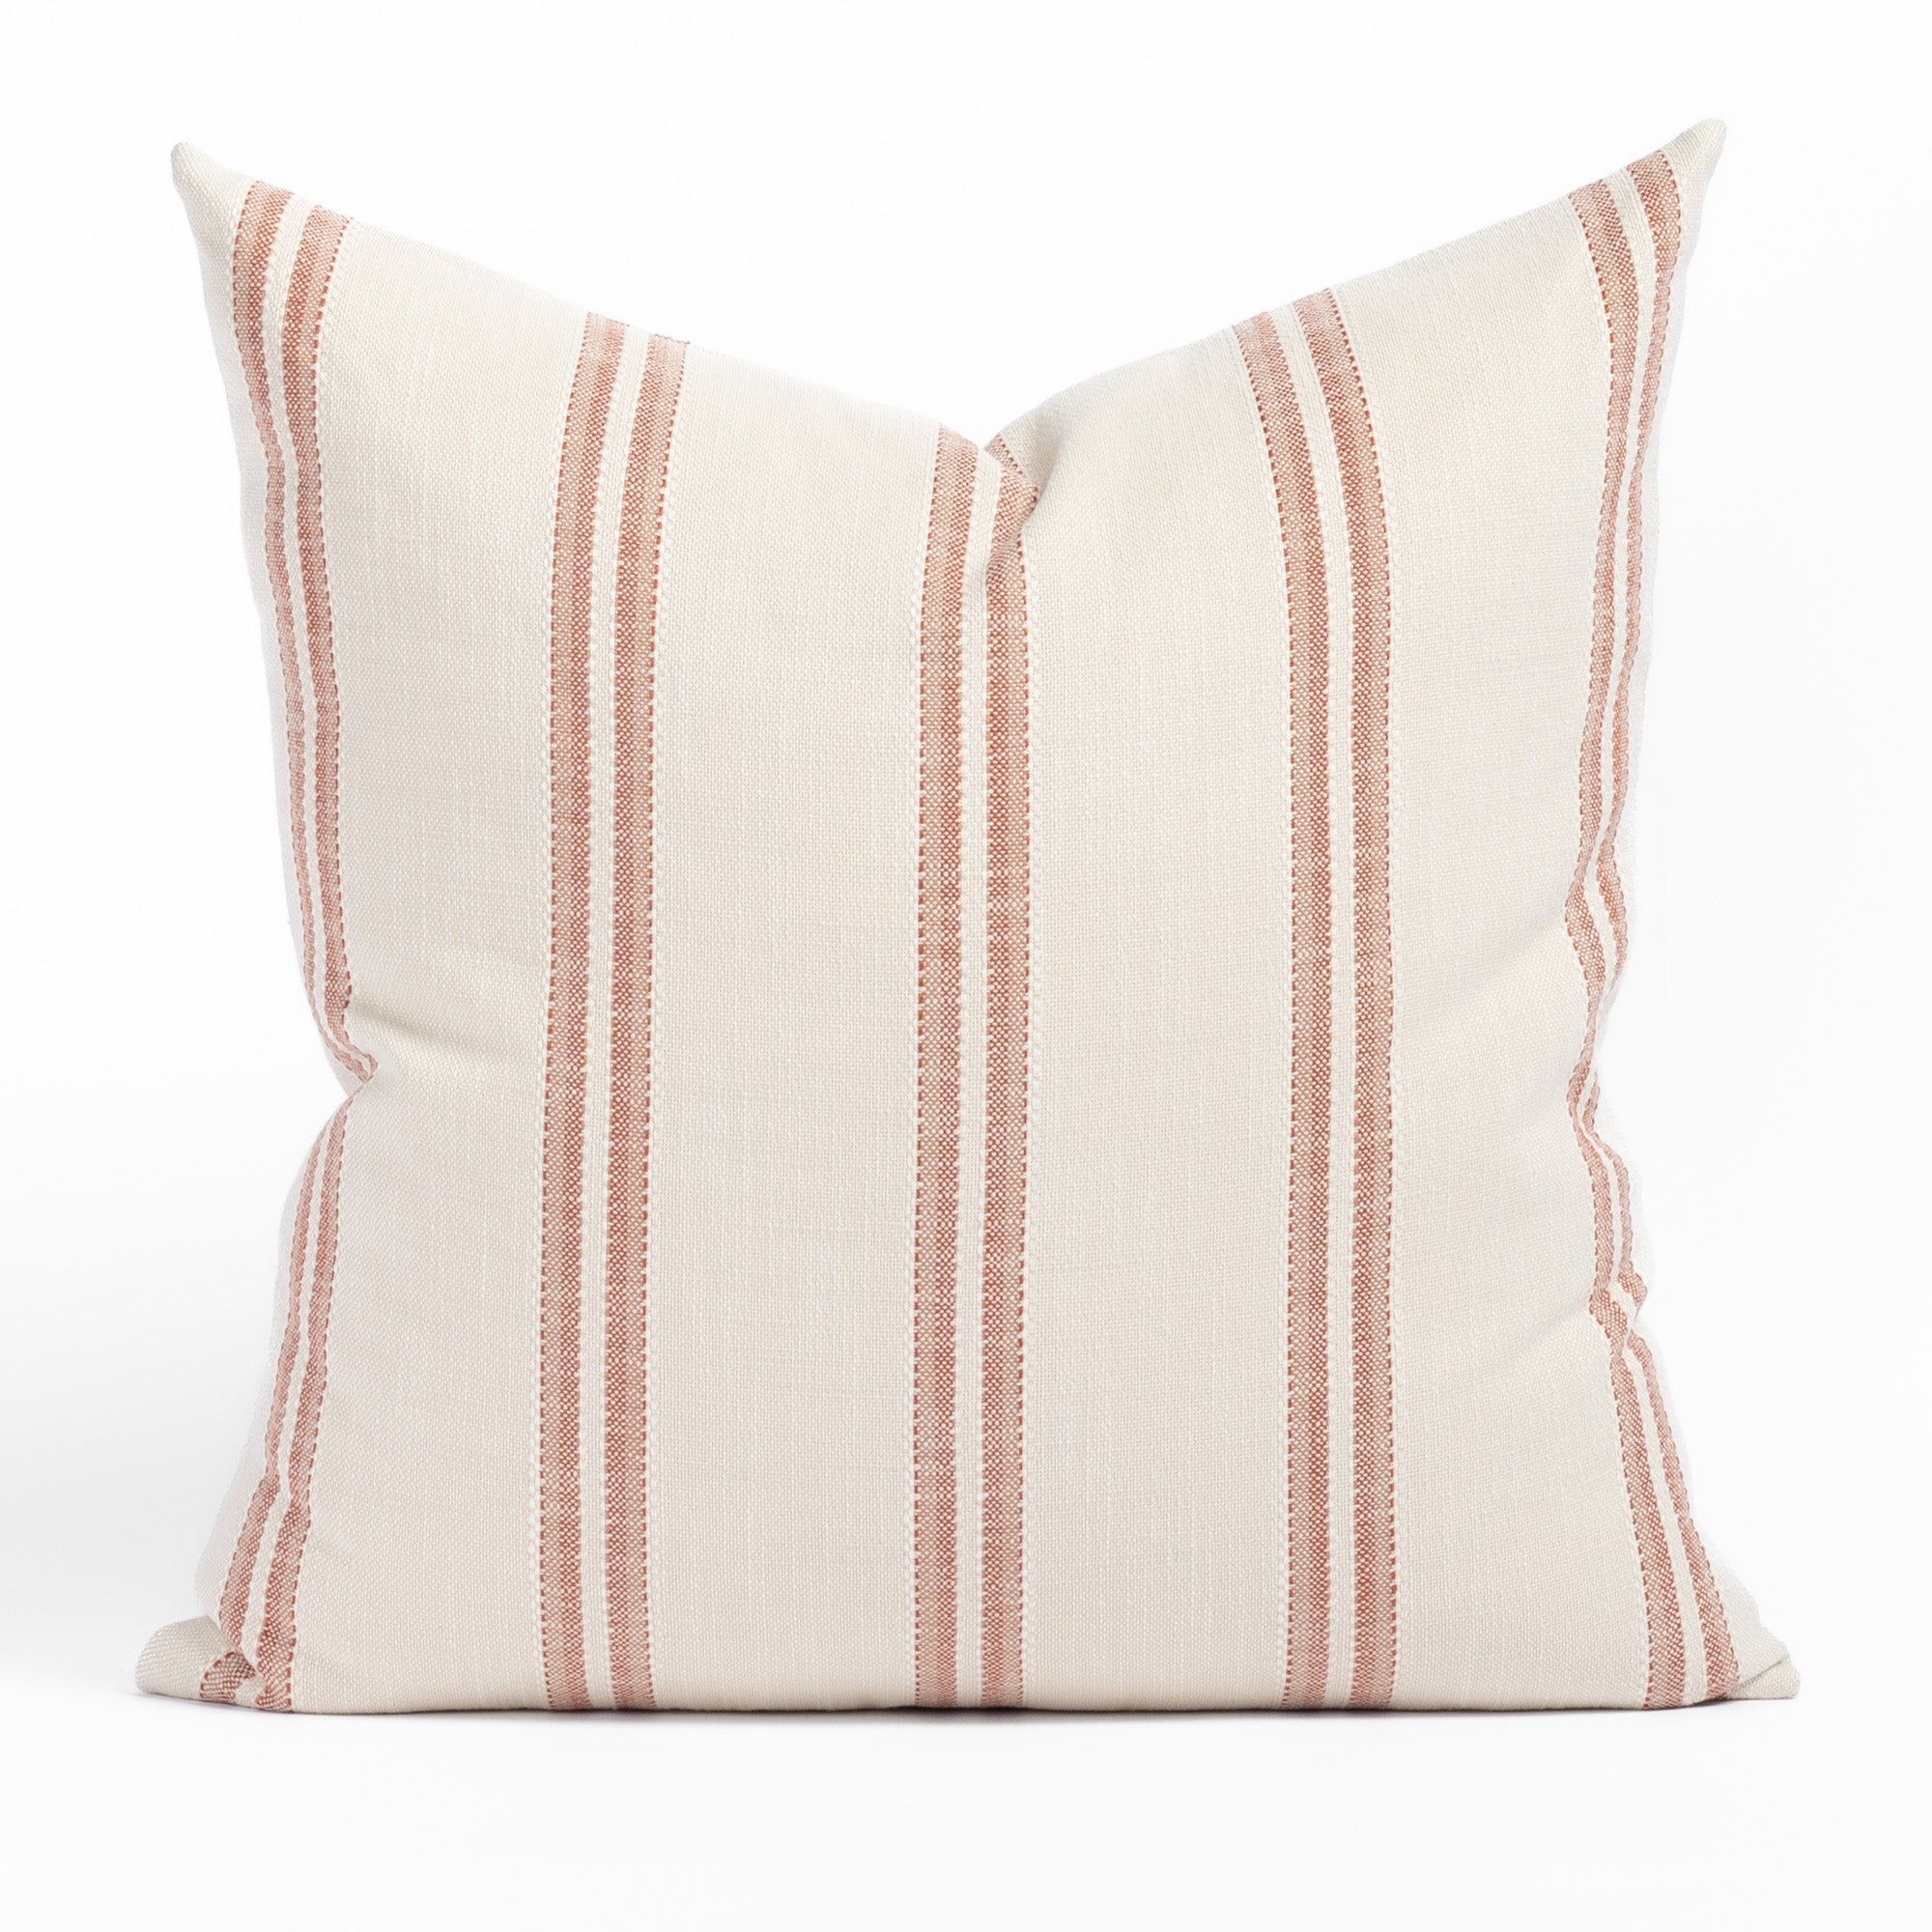 Riviera Stripe 22x22 Pillow Clay, a venetian red and sandy taupe striped outdoor throw pillow from Tonic Living